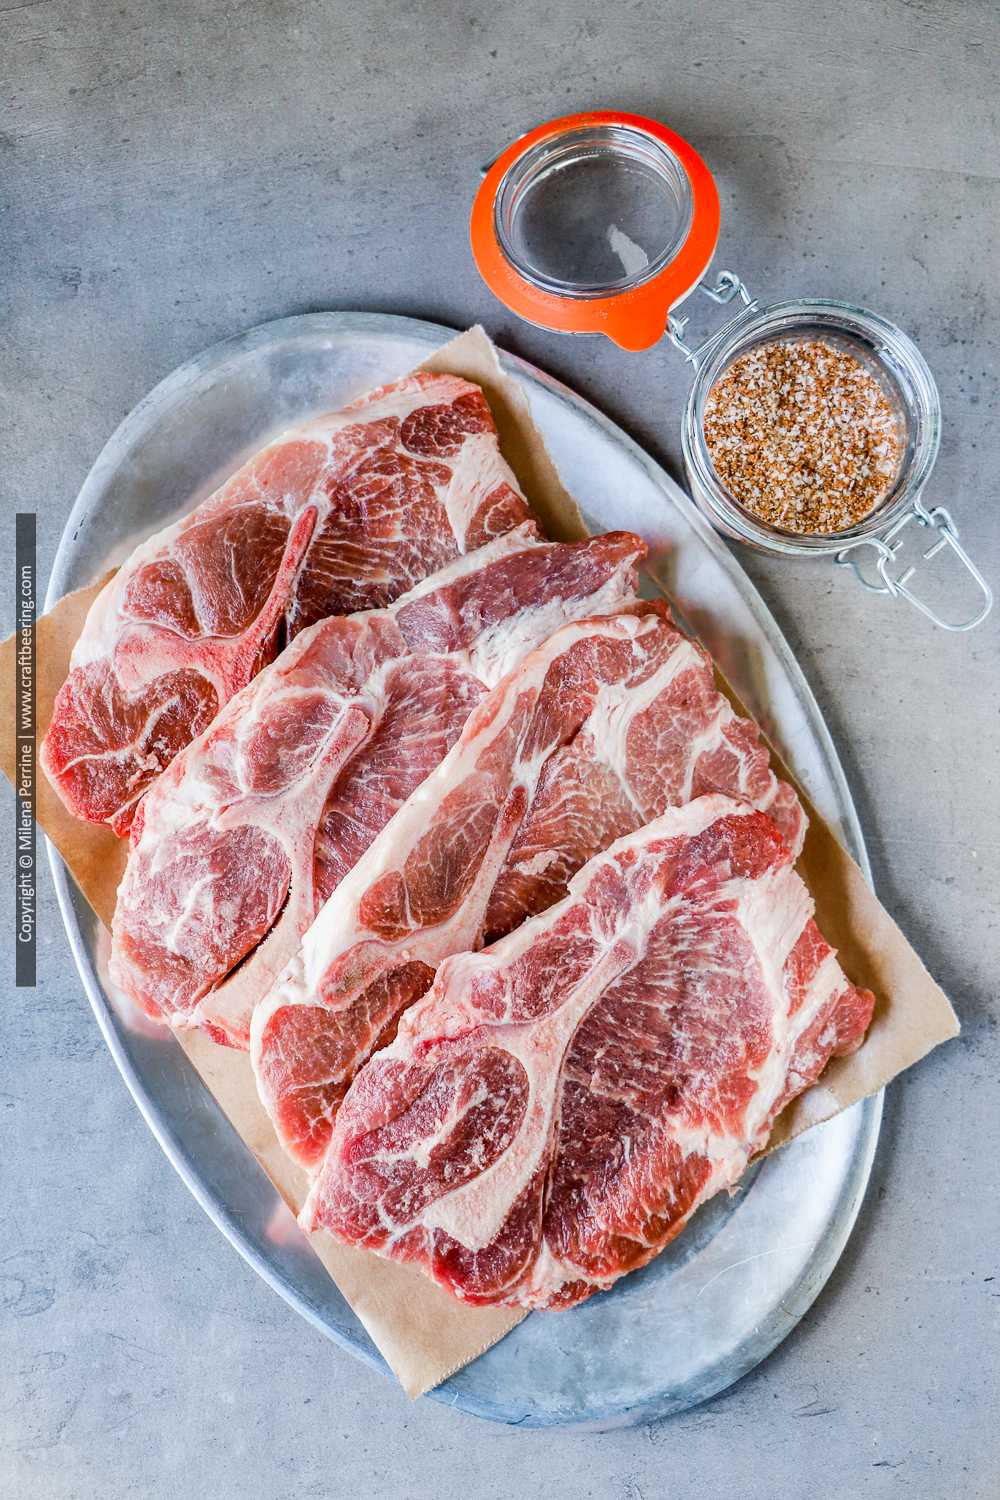 Ingredients for smoked pork steaks